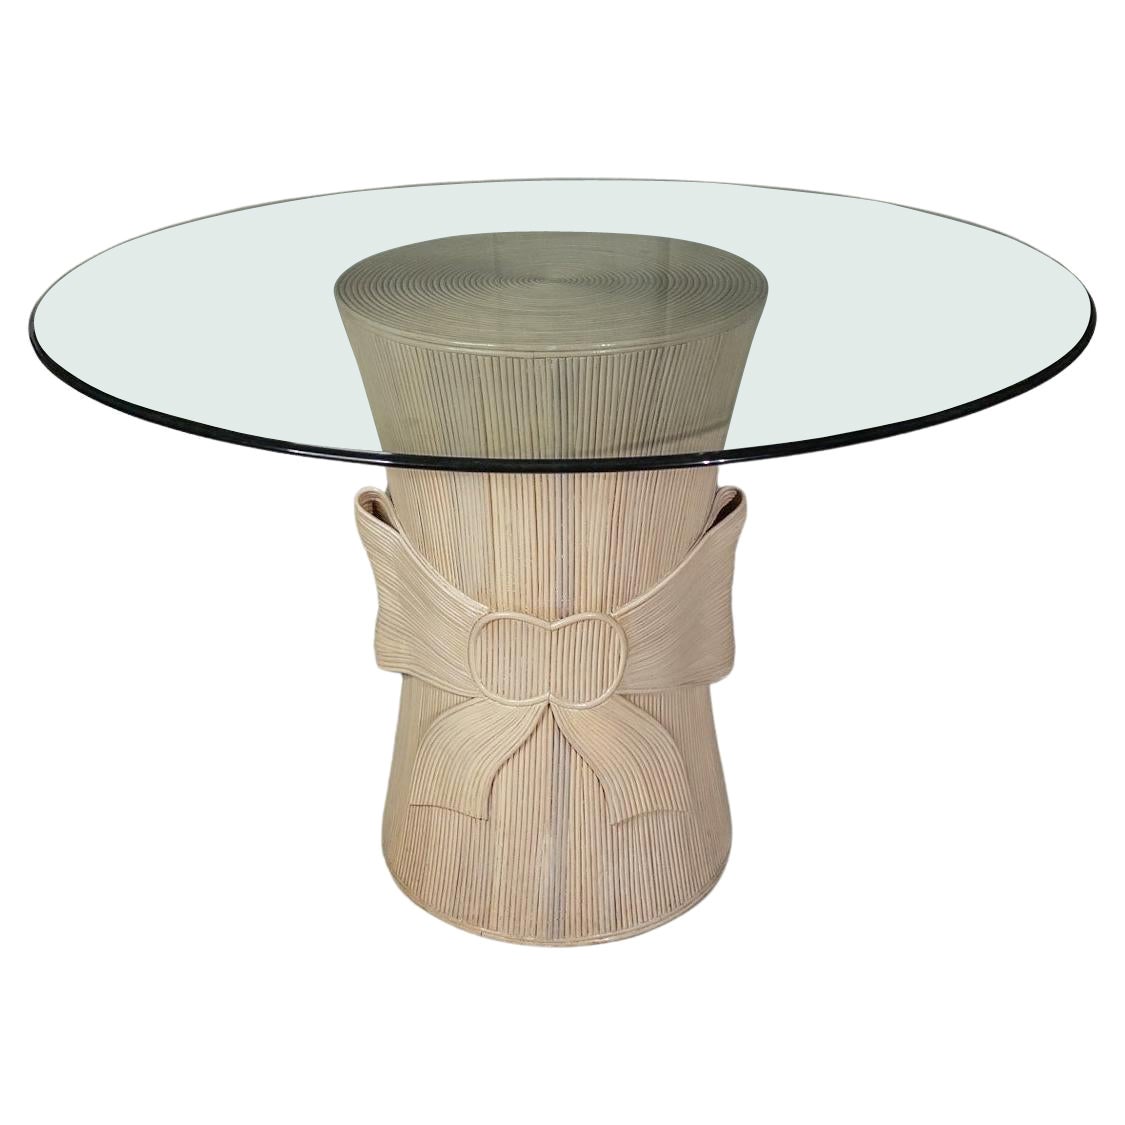 Gabriella Crespi Style Rattan Split Reed Trompe l'Oeil Bow Table with Glass Top